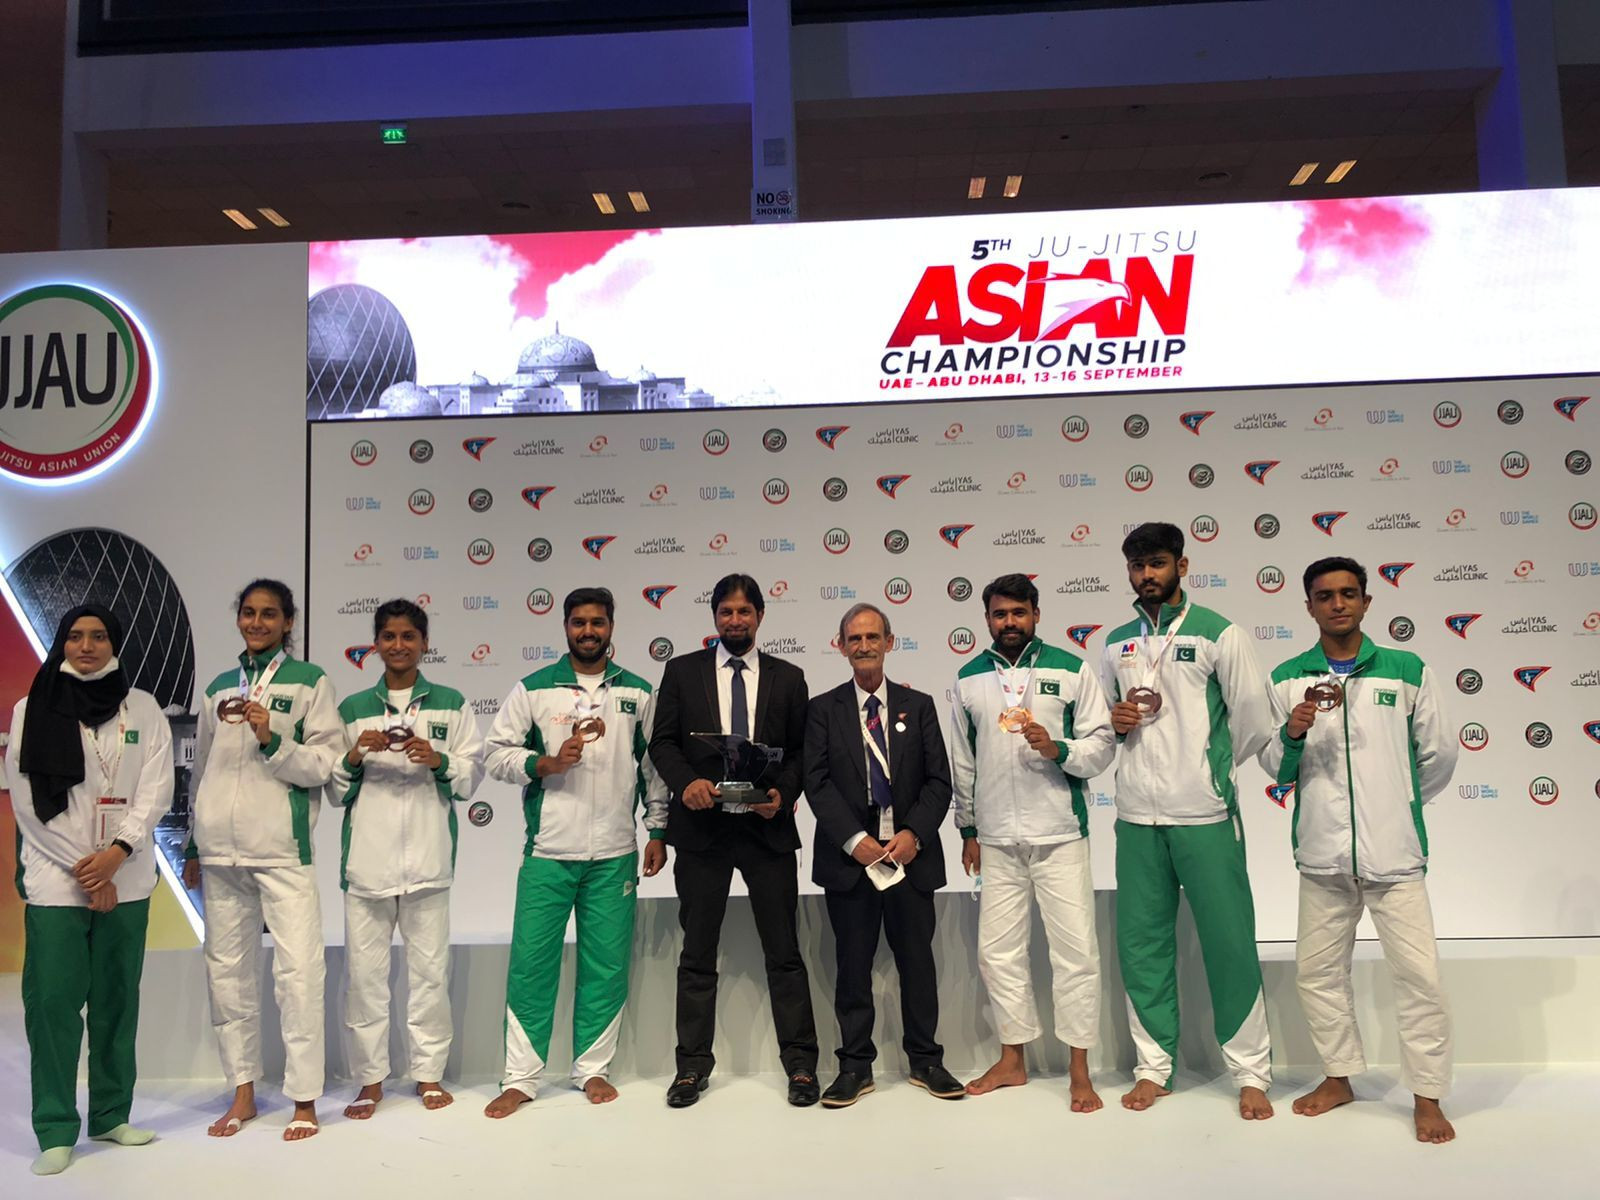 hurraira says that the next event is the world championship in abu dhabi and now is the time for the sponsors to help as pakistan can win more medals and bring more accolades home photo courtesy abu hurraira